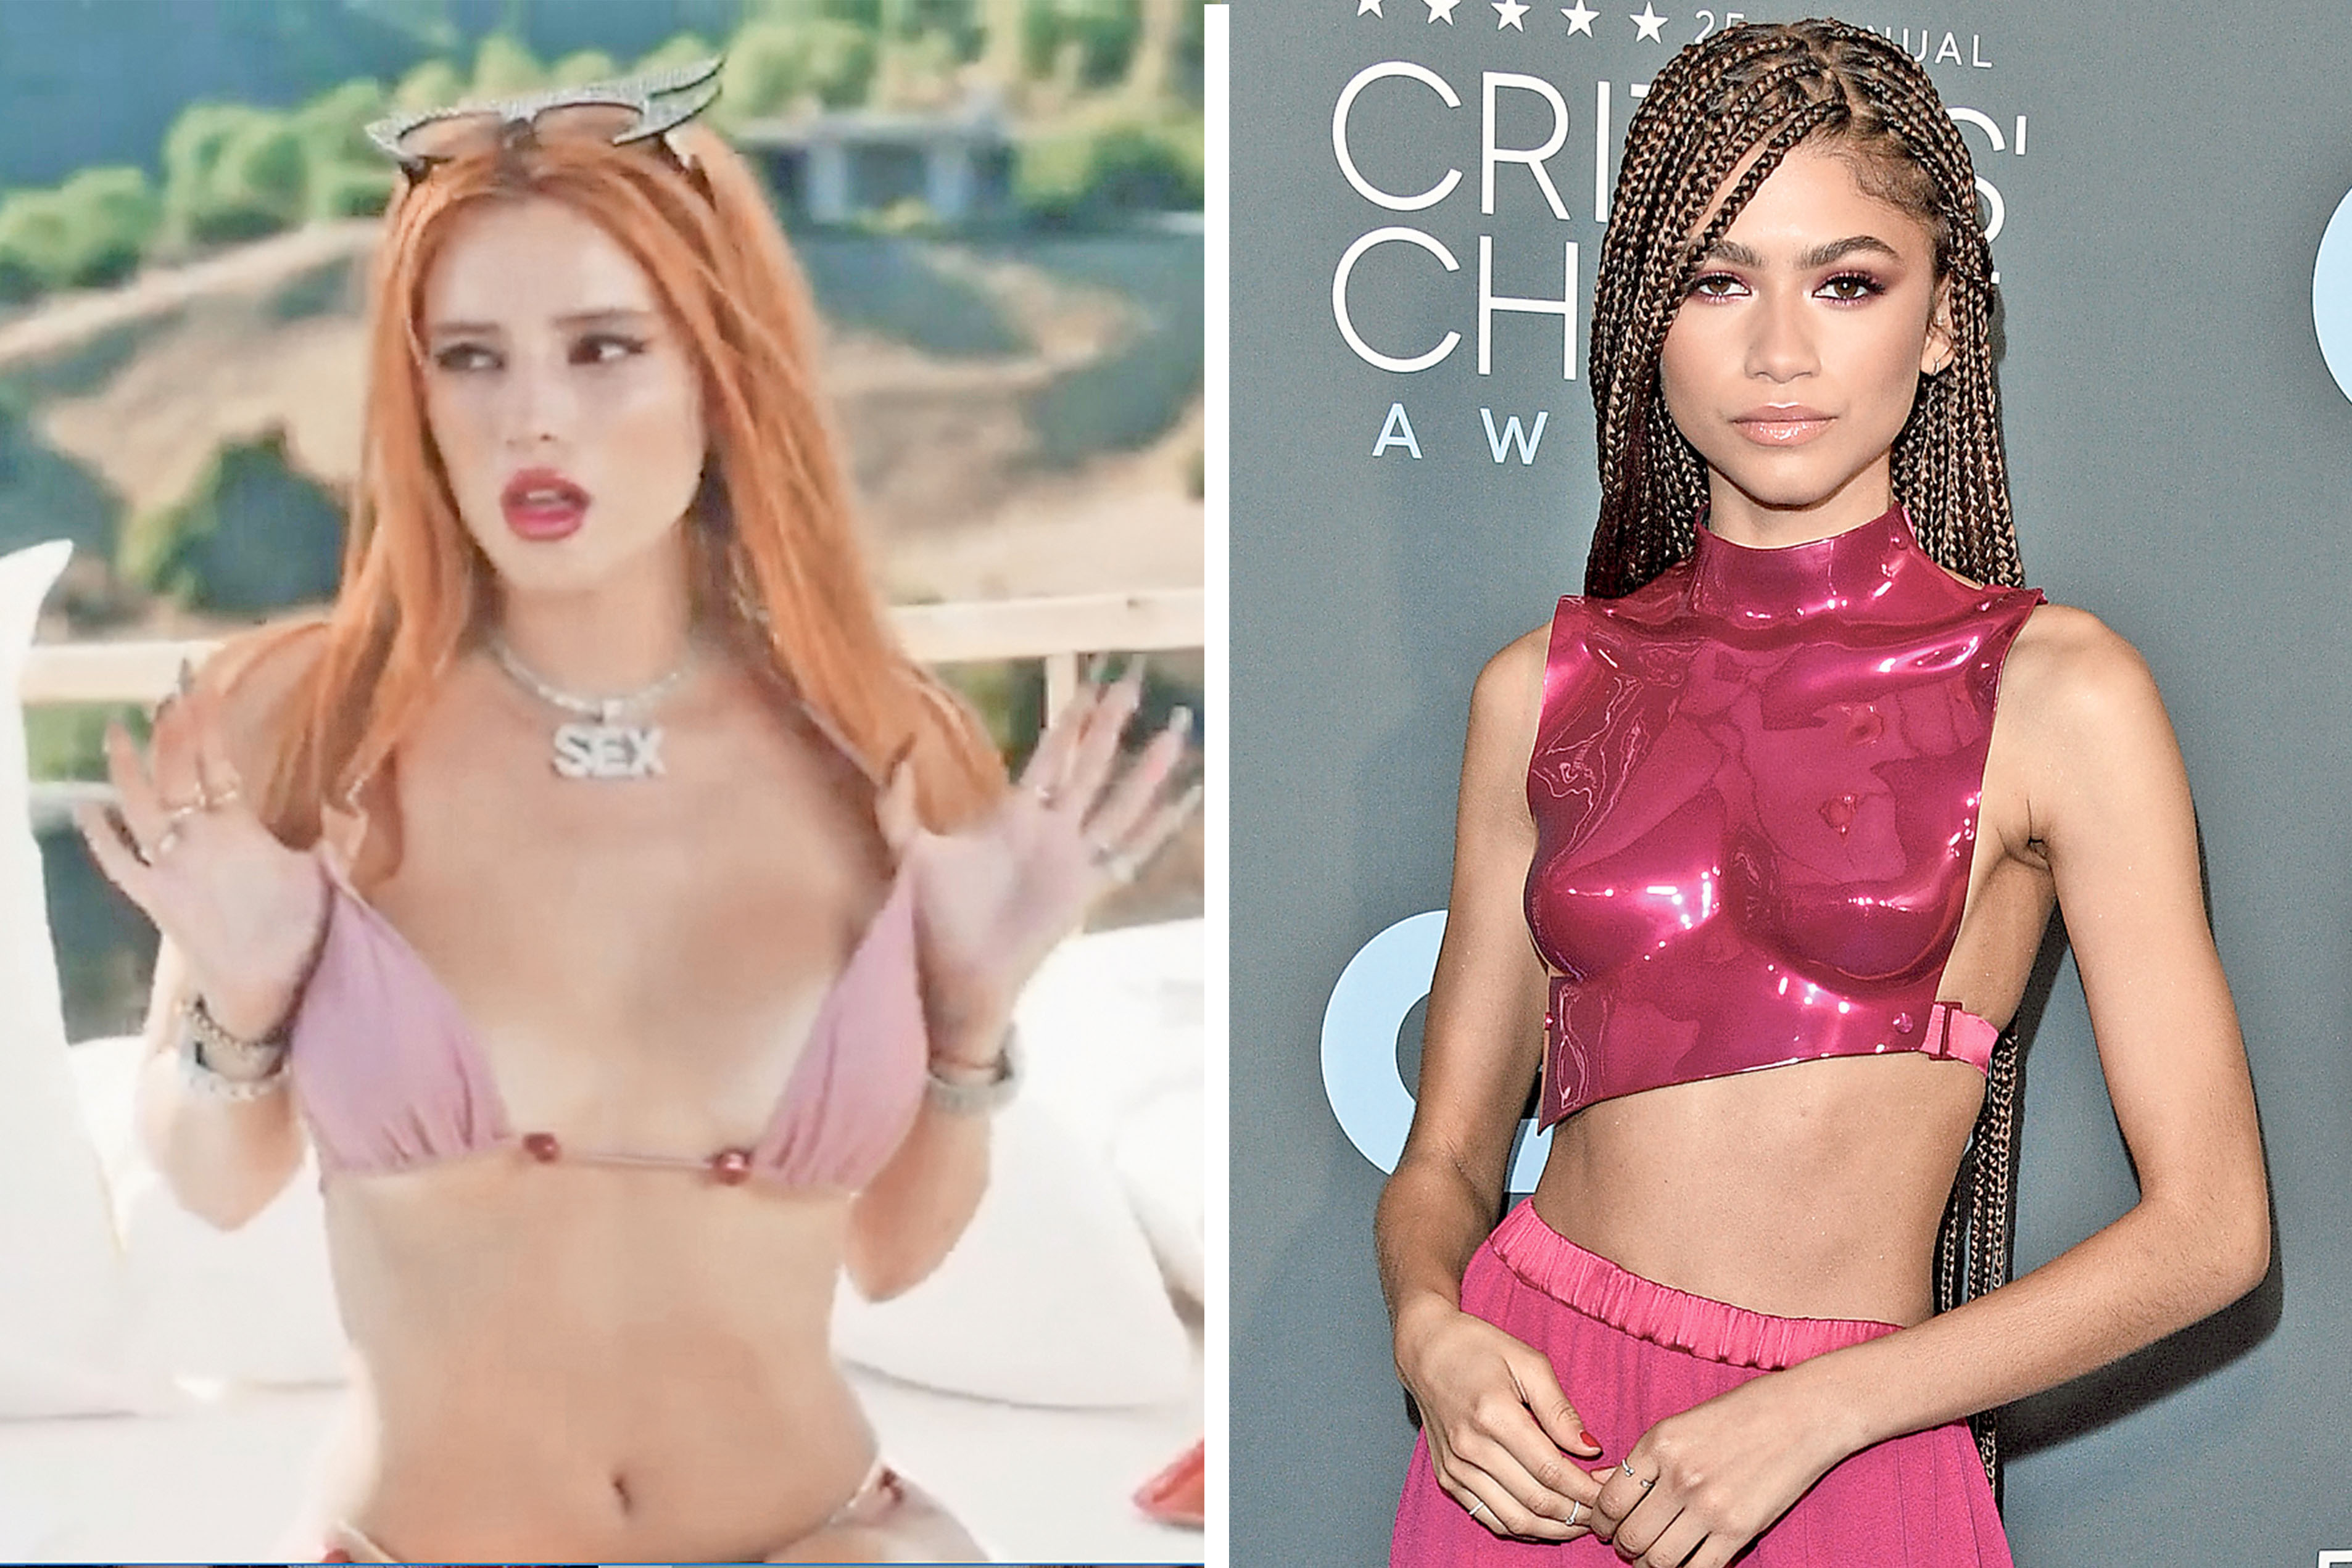 anita le recommends zendaya and bella nude pic